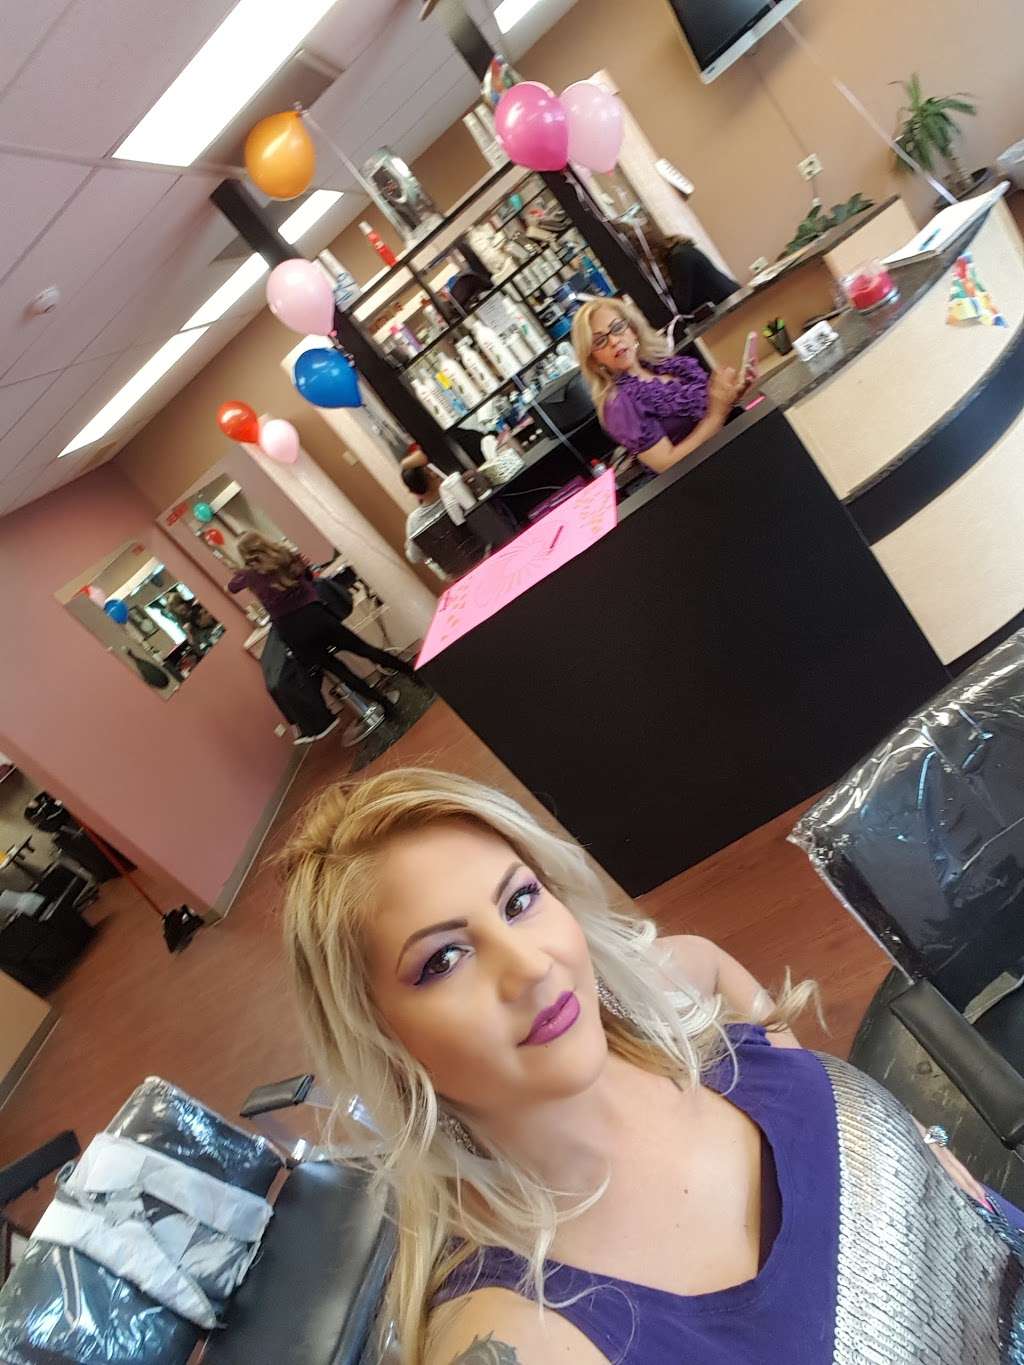 Image Hair Salon | 1581 Bloomingdale Rd A, Glendale Heights, IL 60139 | Phone: (630) 668-2406